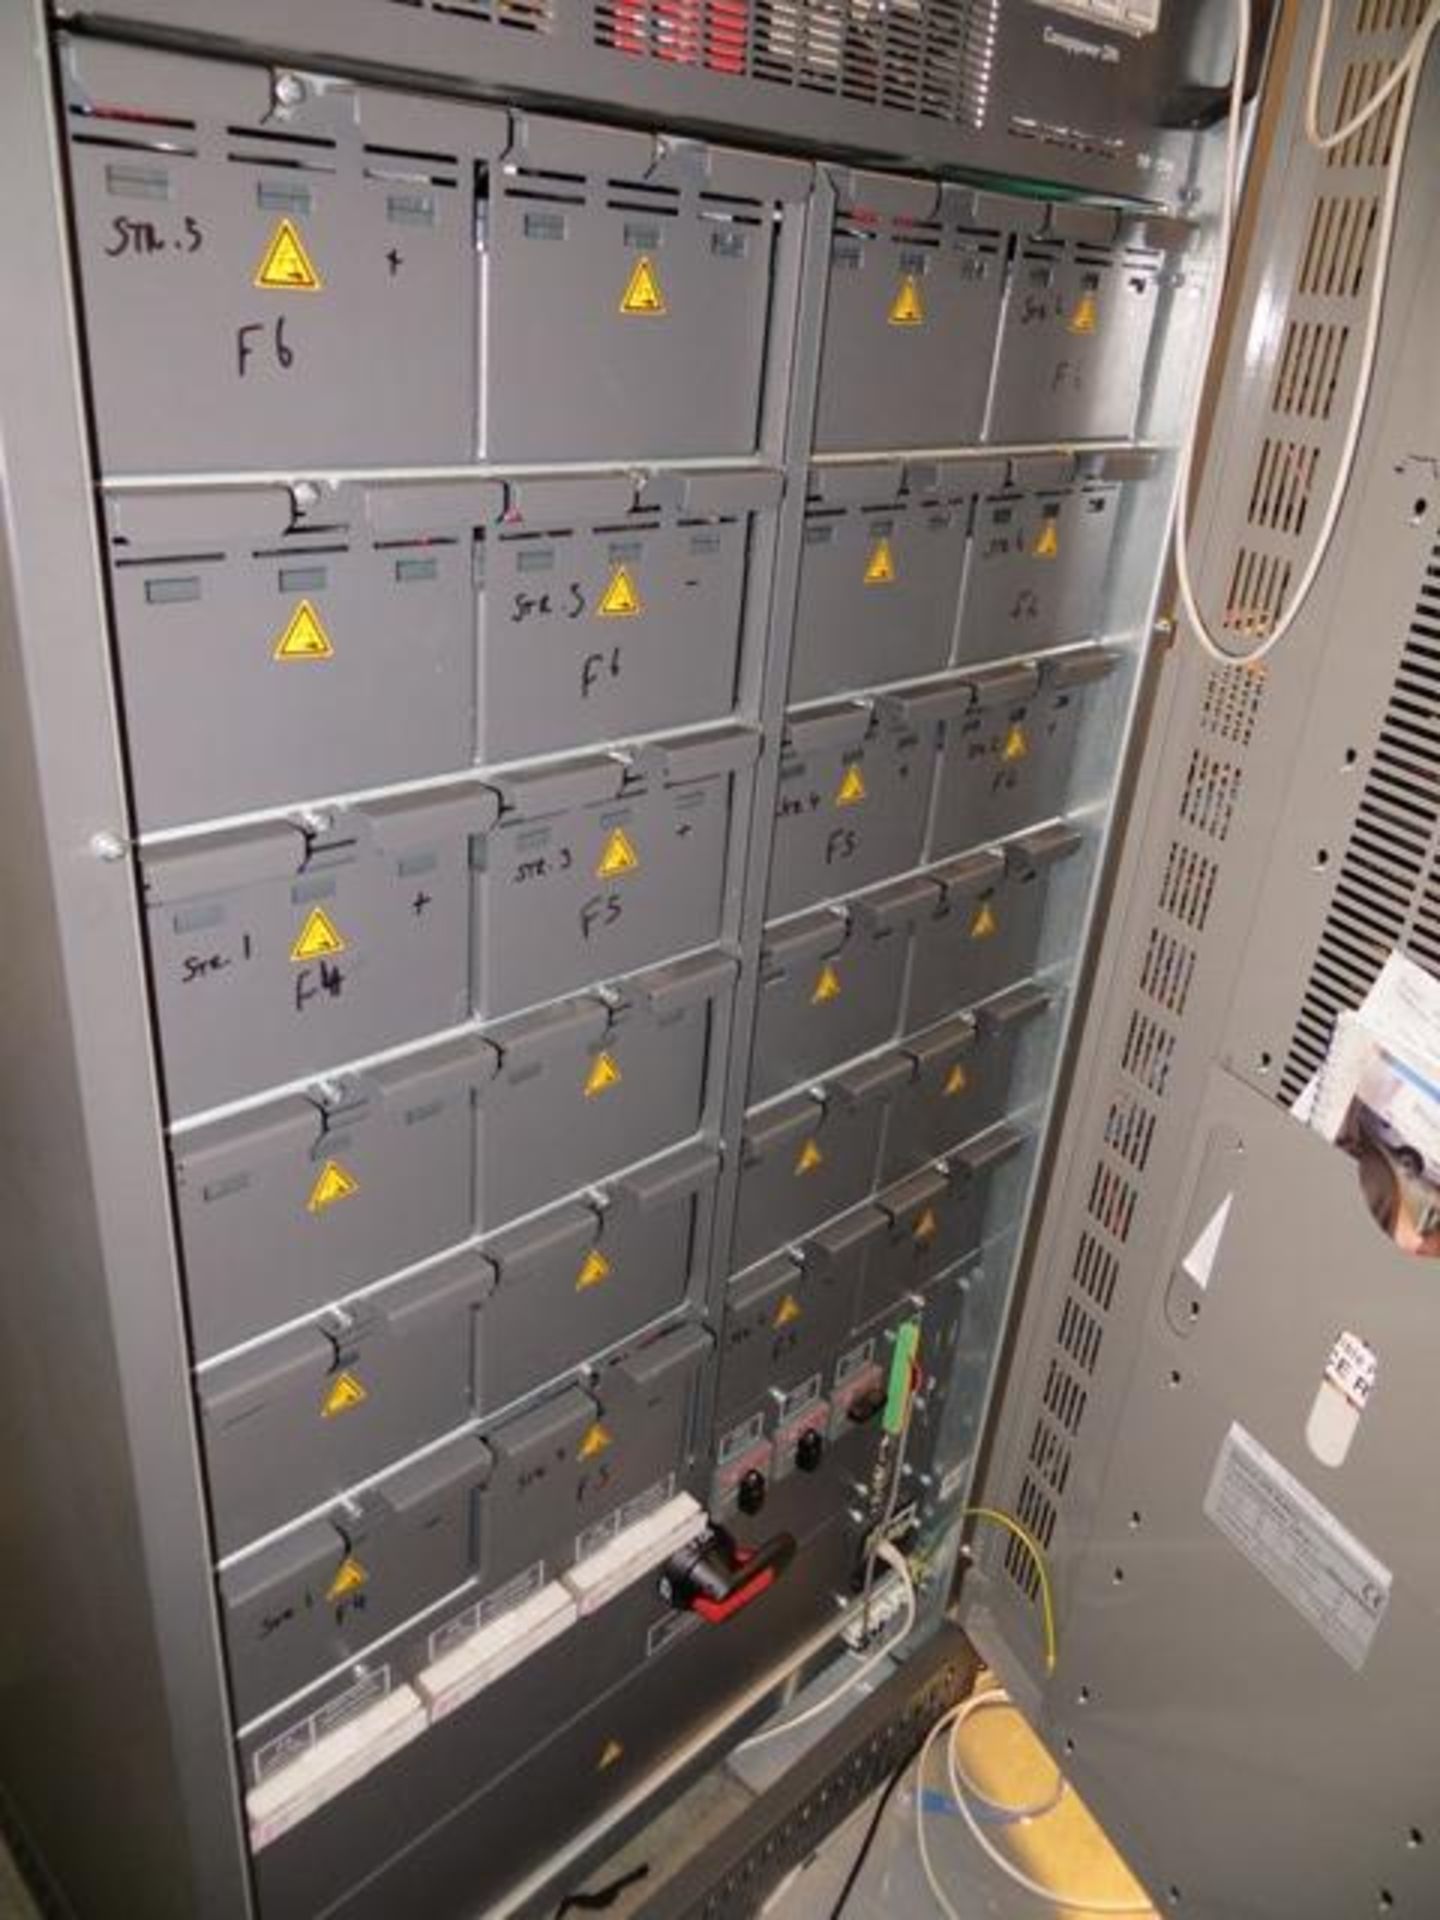 Kohler Power Wave PW9000DPA 2x 40KVA UPS s/n DPT 945. NB A work Method Statement and Risk Assessment - Image 4 of 5